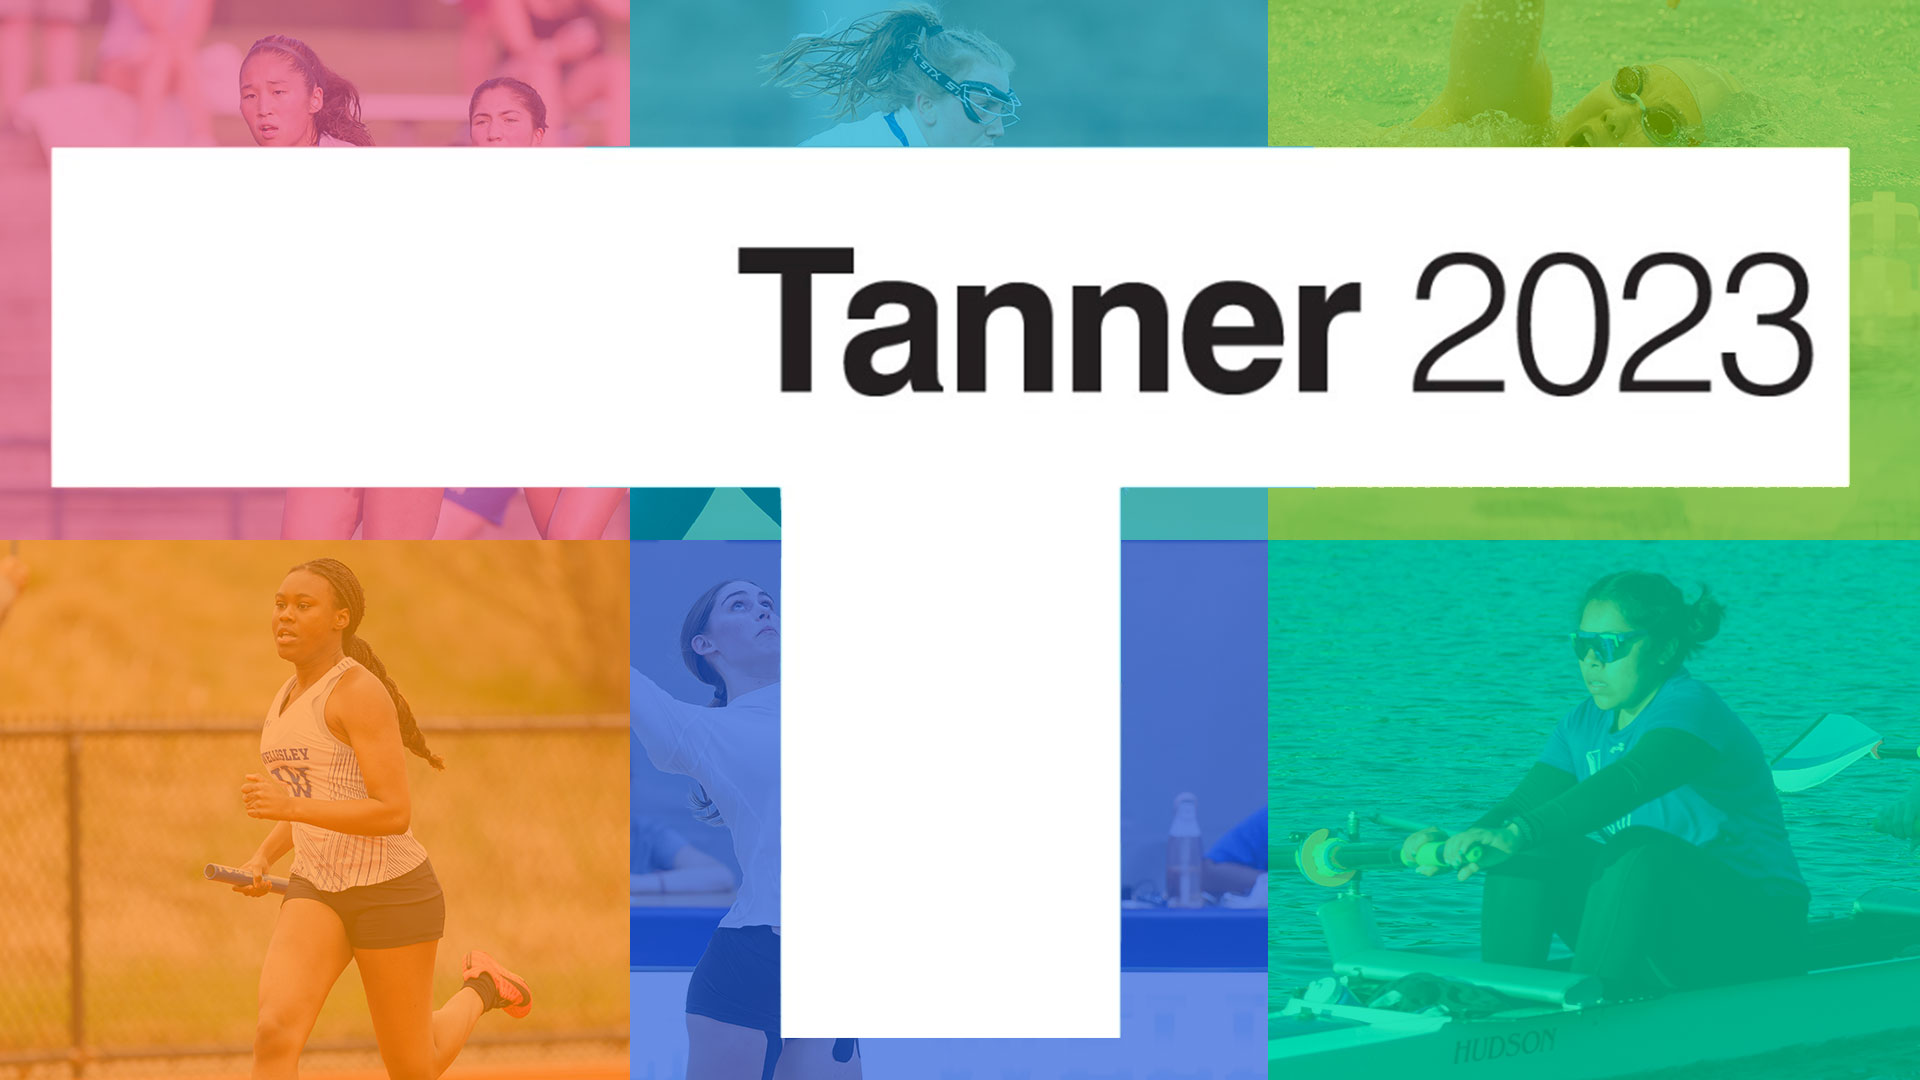 The annual Tanner Conference will take place on Tuesday, November 14, 2023 at Wellesley.